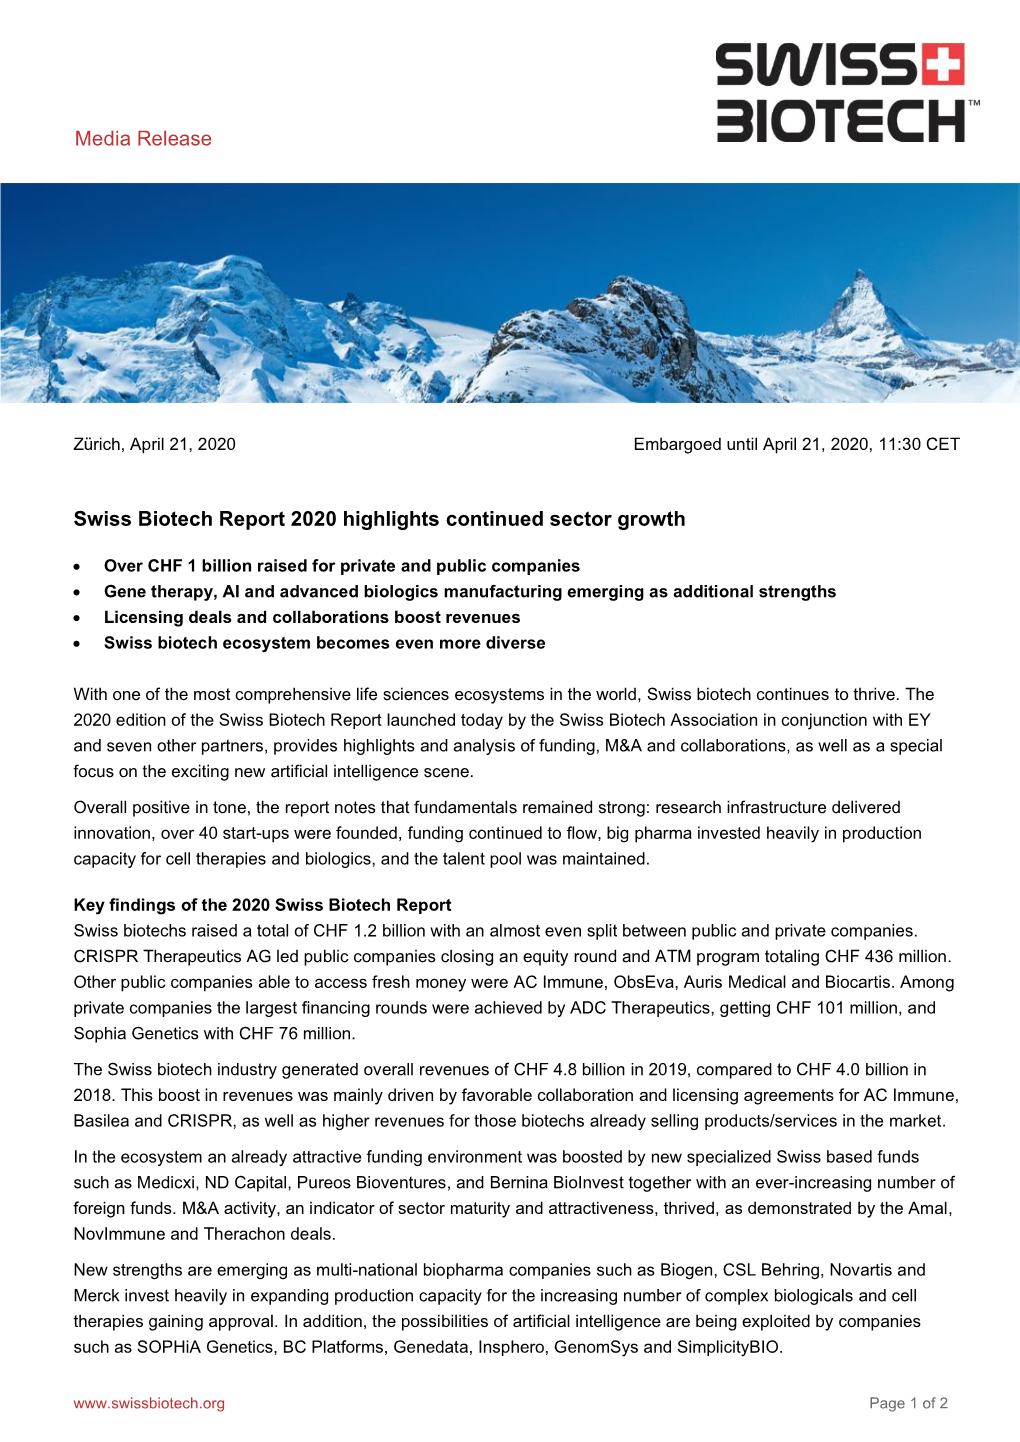 Media Release Swiss Biotech Report 2020 Highlights Continued Sector